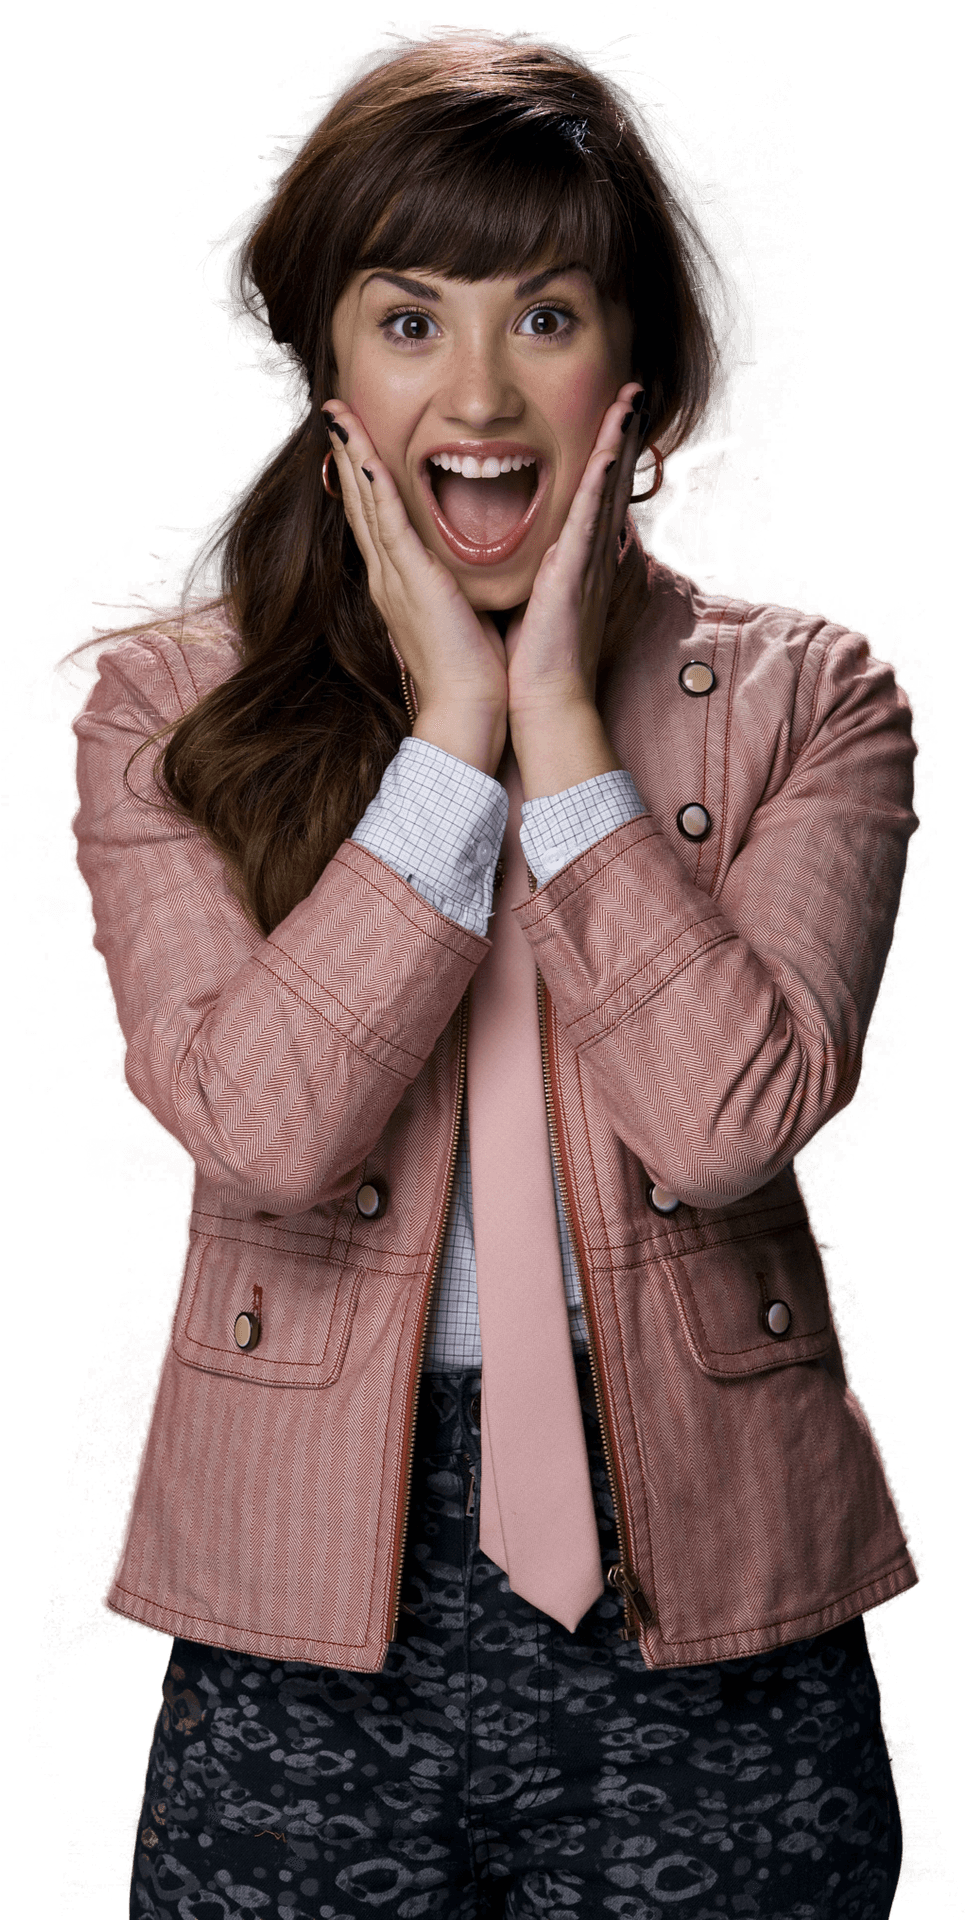 Excited Woman Expressive Pose PNG image